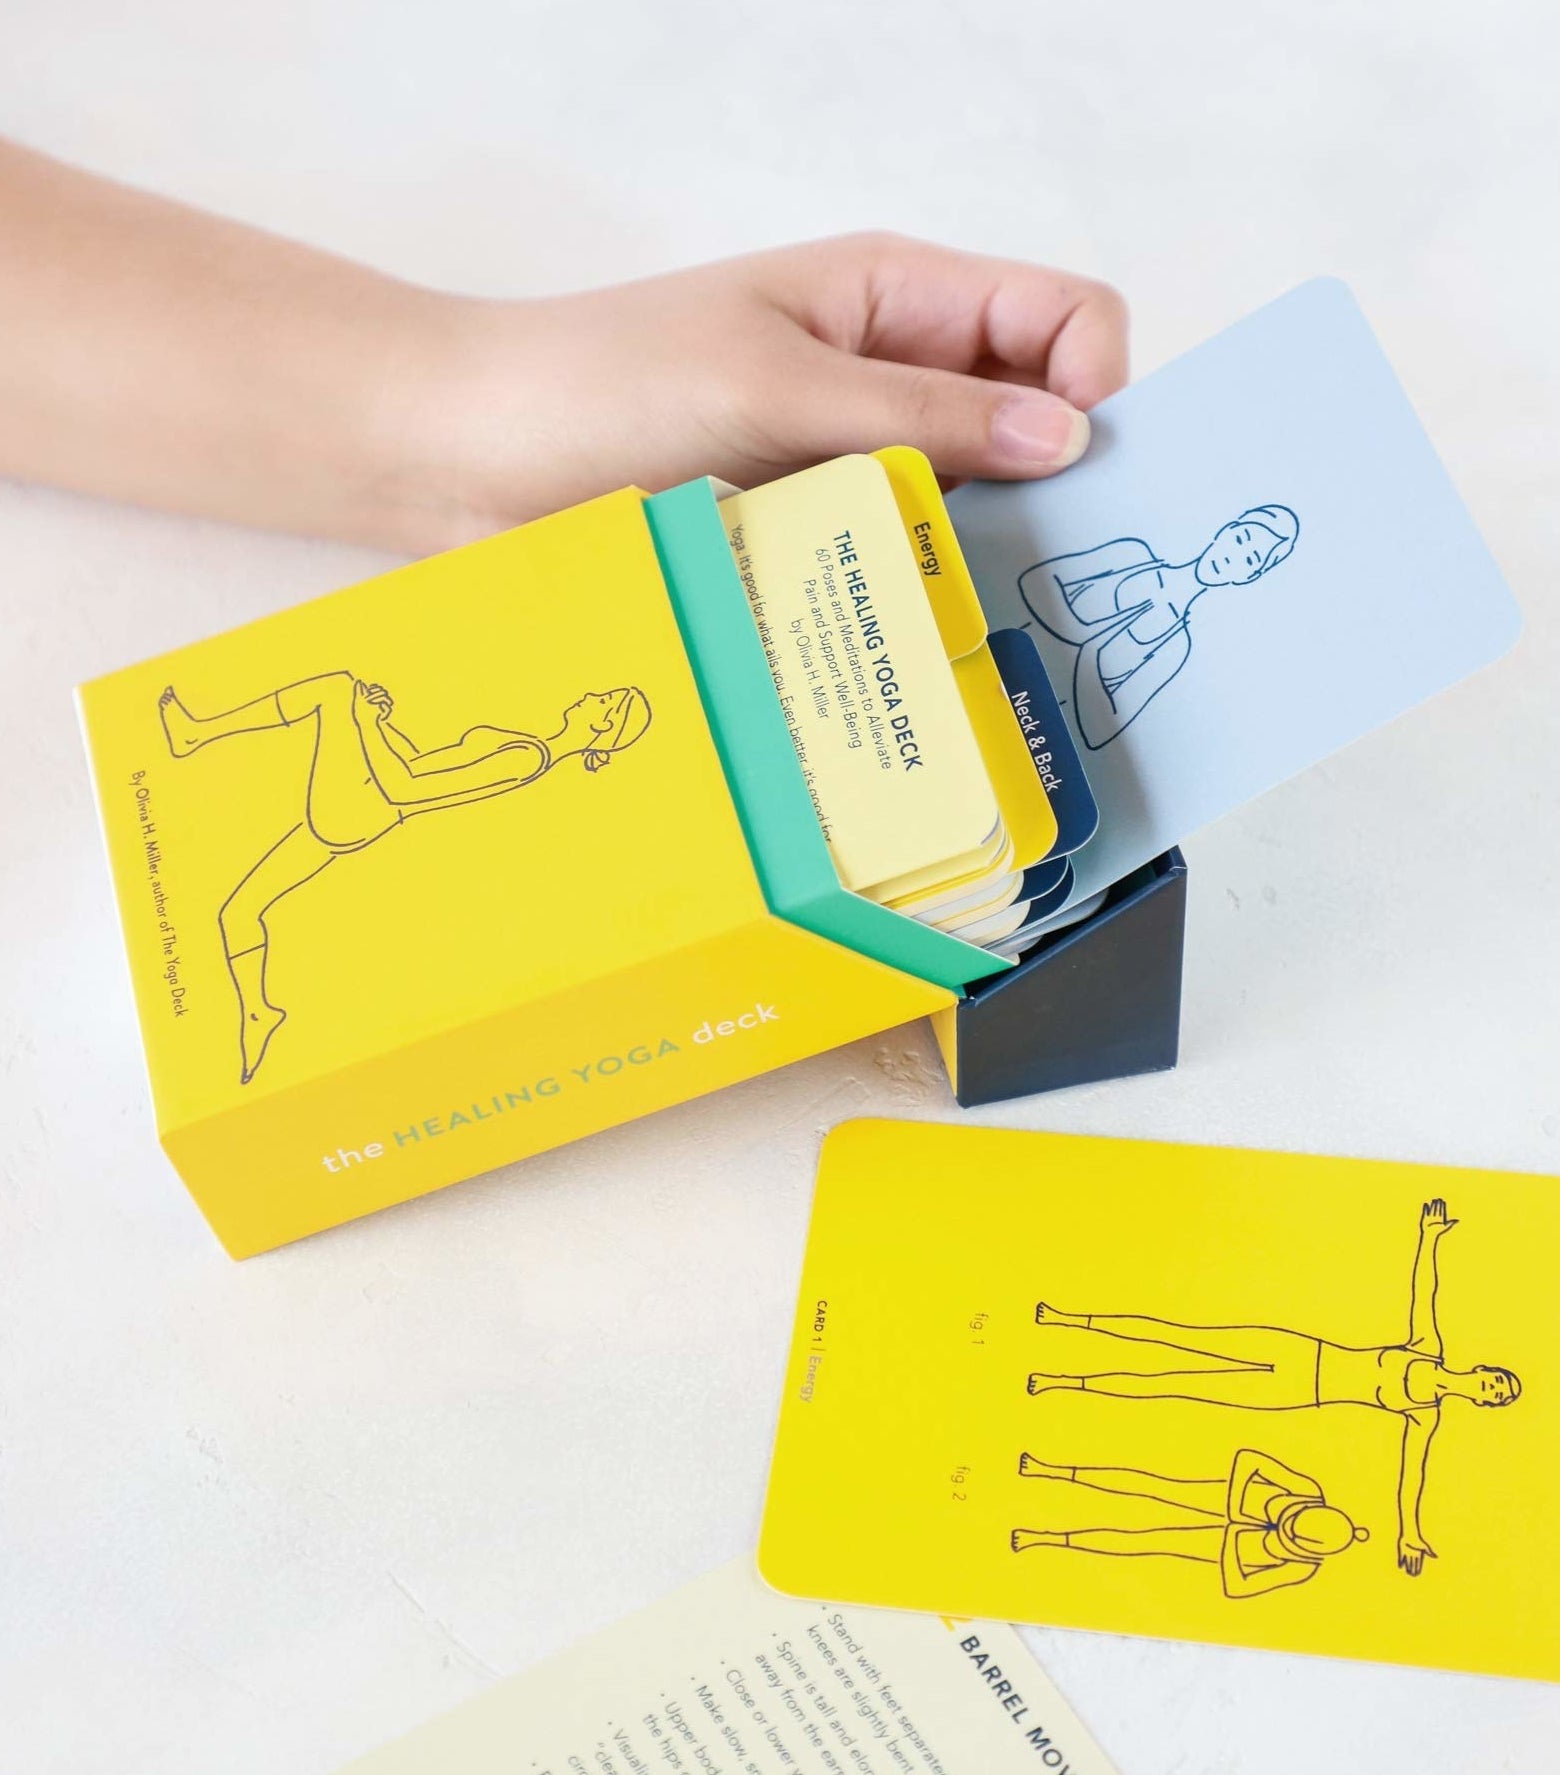 A person pulling a yoga card out of the box